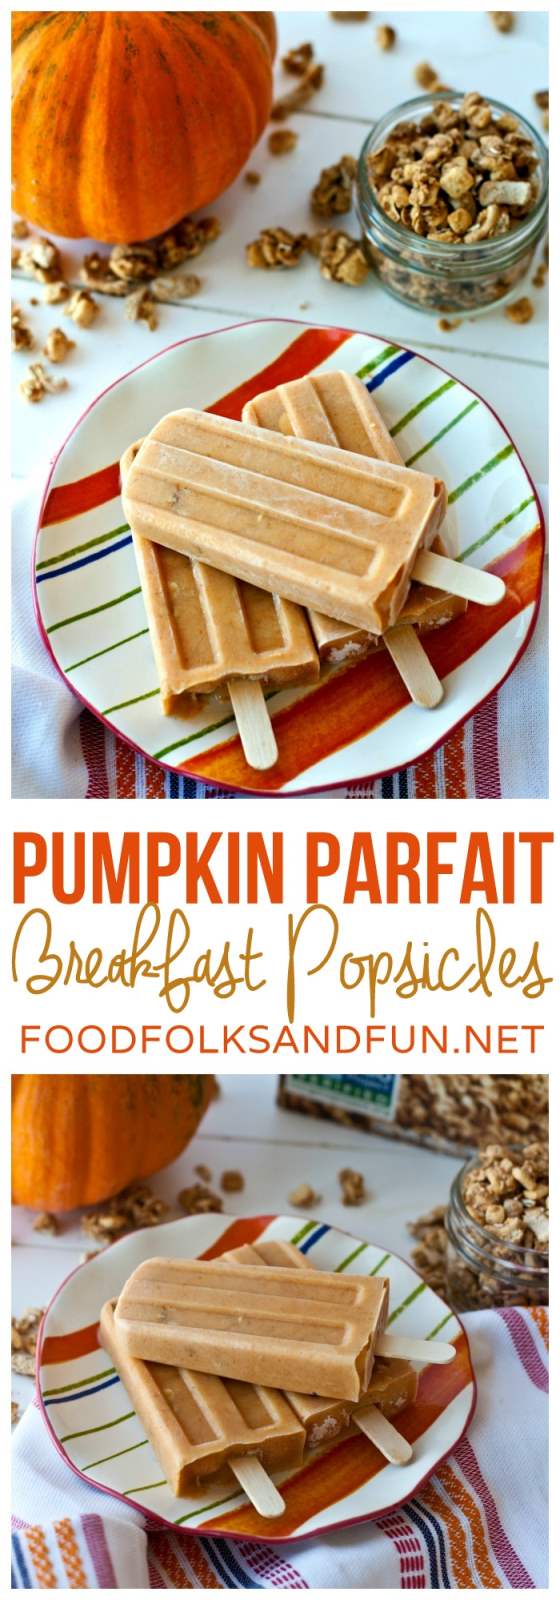 Collage of Pumpkin Parfait Breakfast Popsicles with text overlay for Pinterest